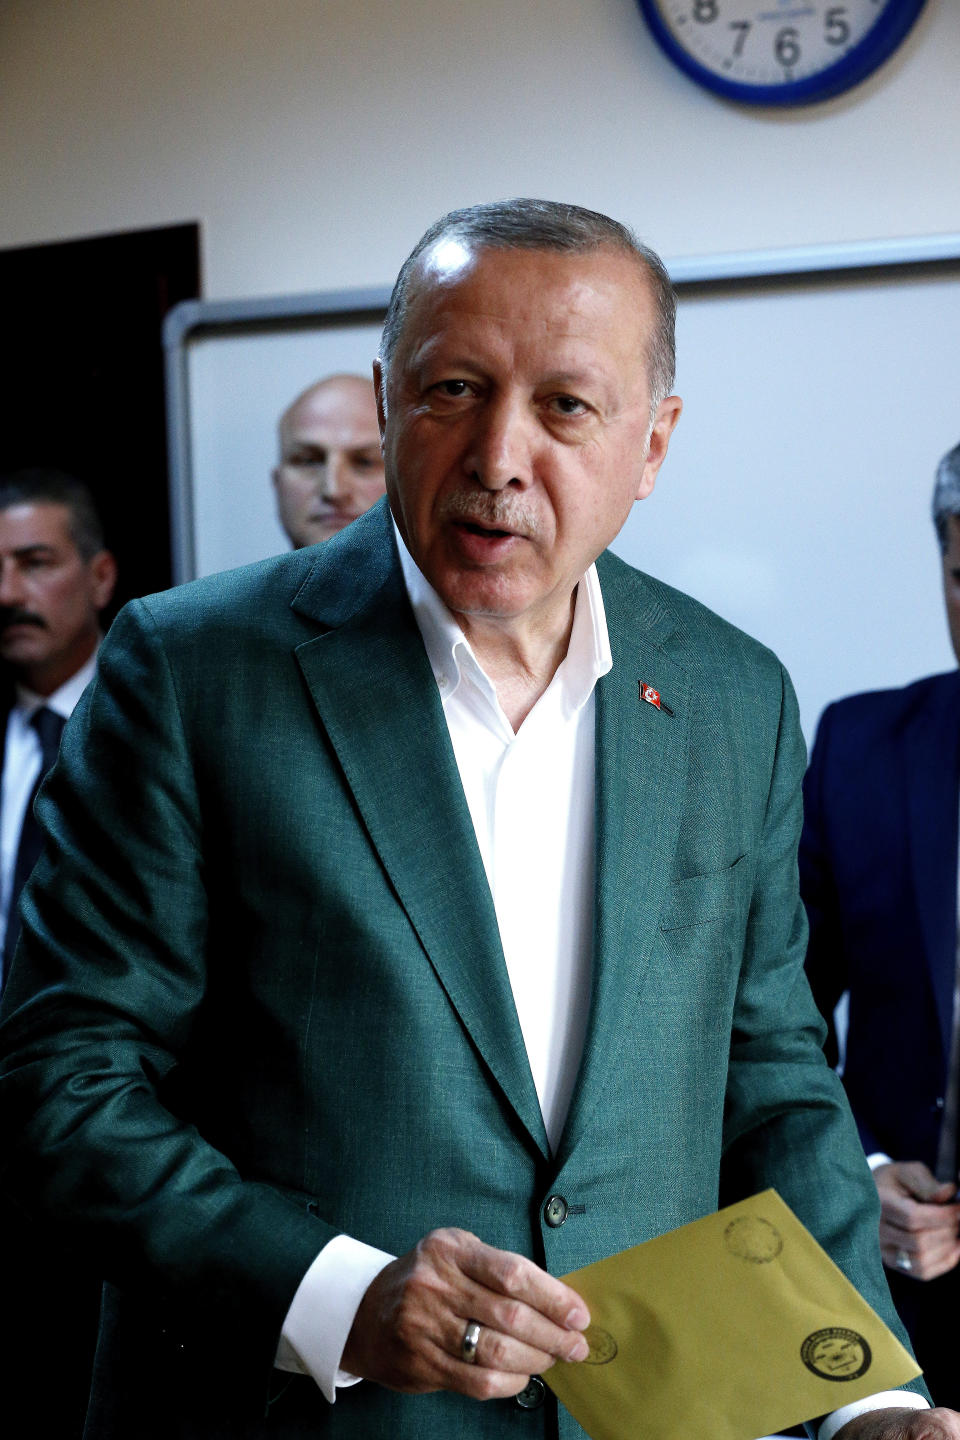 Turkey's President Recep Tayyip Erdogan, casts his ballot during the local elections, in Istanbul, Sunday, March 31, 2019. Mayoral elections are underway in 30 large cities in Turkey along with other municipal races Sunday that are seen as a barometer of President Recep Tayyip Erdogan's popularity amid a sharp economic downturn in the nation straddling Europe and Asia. (AP Photo/Lefteris Pitarakis)